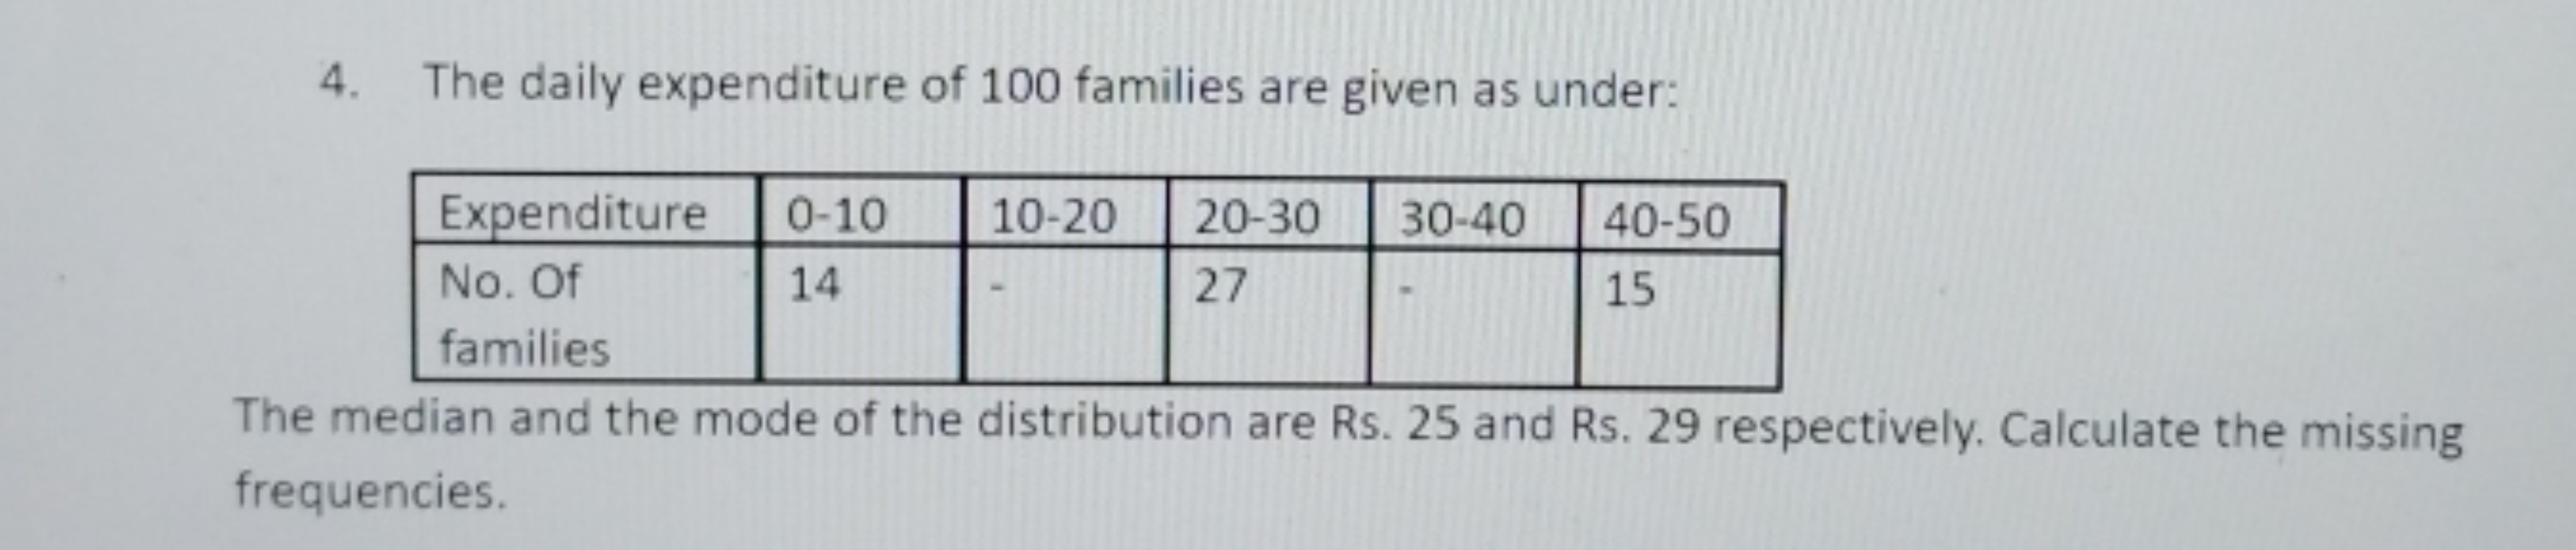 4. The daily expenditure of 100 families are given as under:
Expenditu